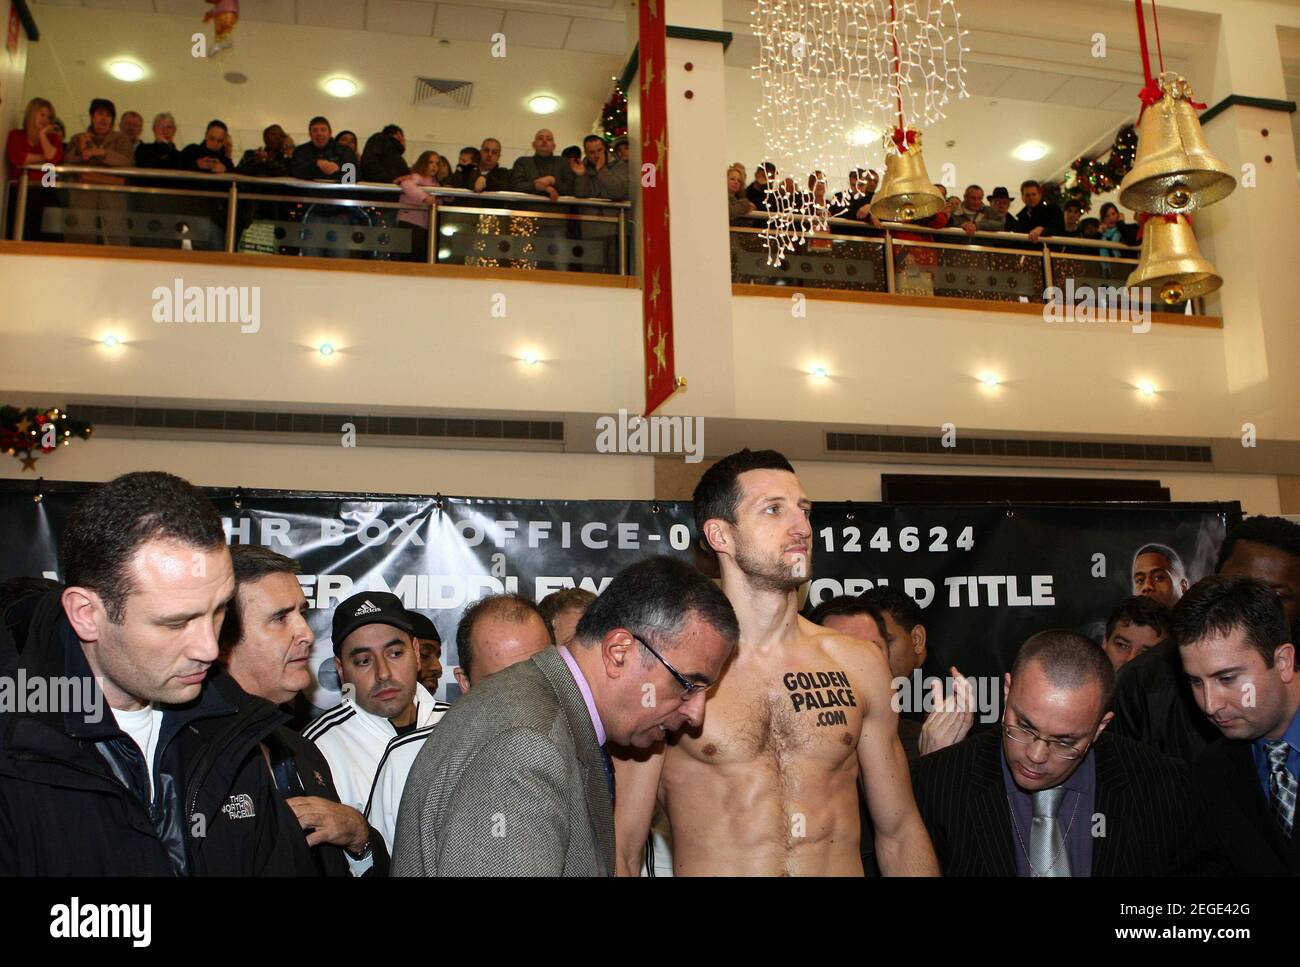 Boxing - Carl Froch & Jean Pascal Weigh-In - Victoria Shopping Centre, Nottingham, NG1 3QN - 5/12/08  Carl Froch (C) during the Weigh In  Mandatory Credit: Action Images / Scott Heavey  Livepic Stock Photo